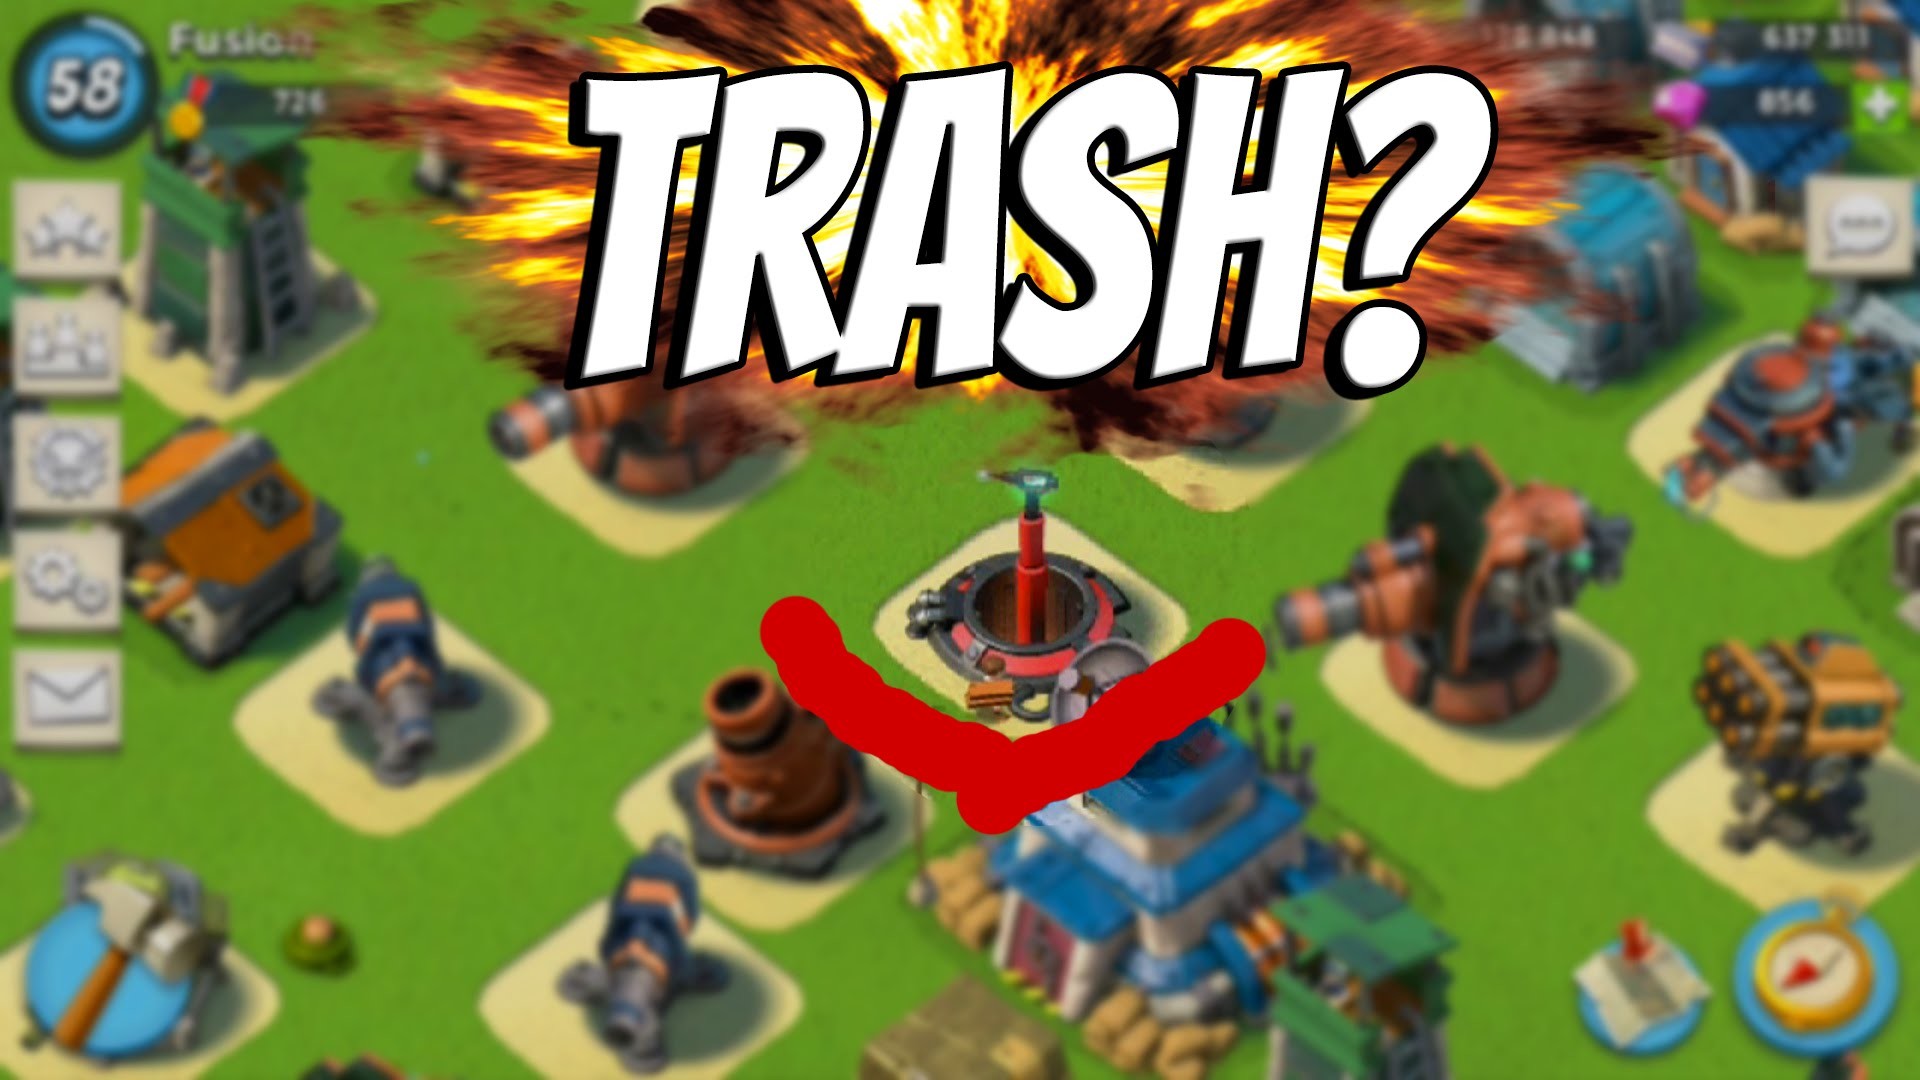 1920x1080 (Prototype Miniseries) | BOOM BEACH (IOS/Android) Doom Cannon Review